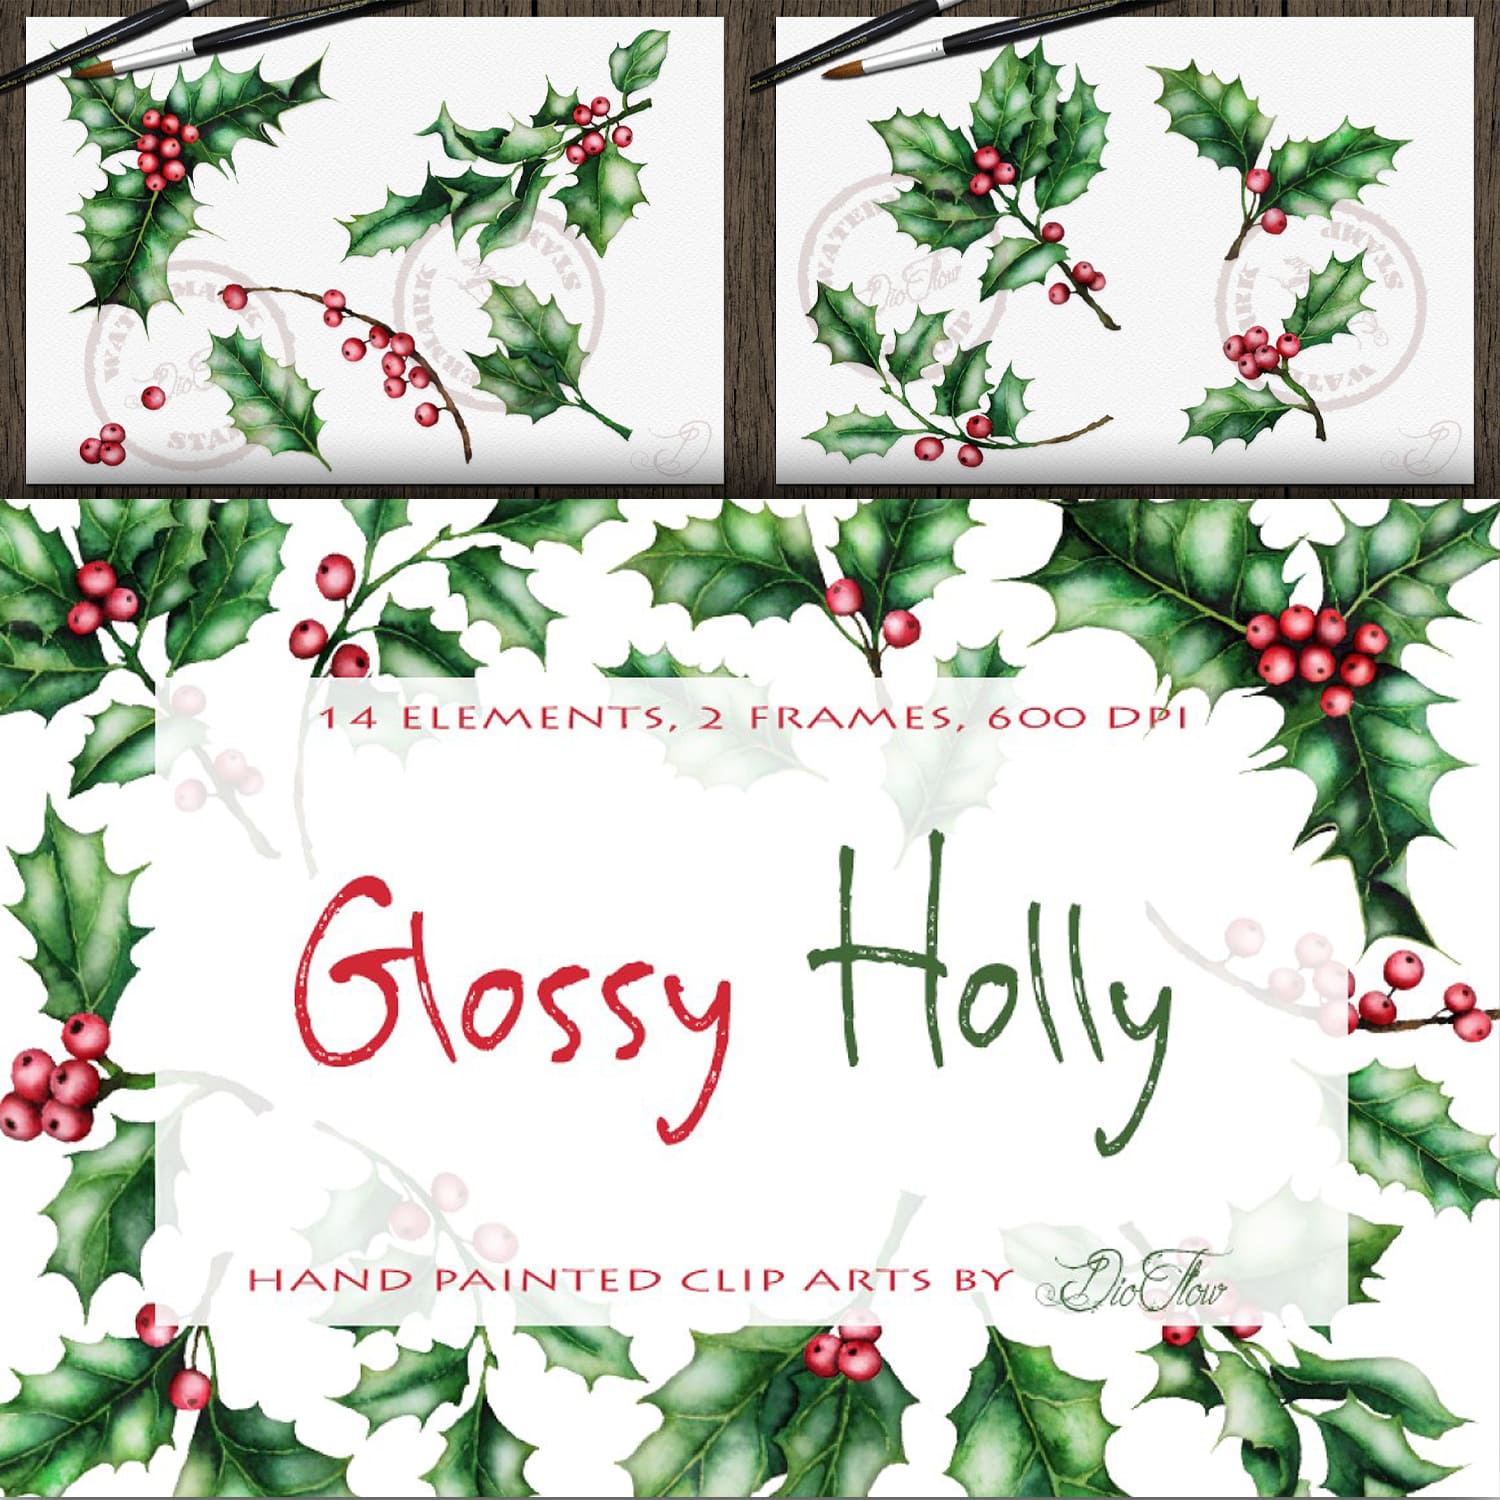 Holly Watercolor Clip Art cover.